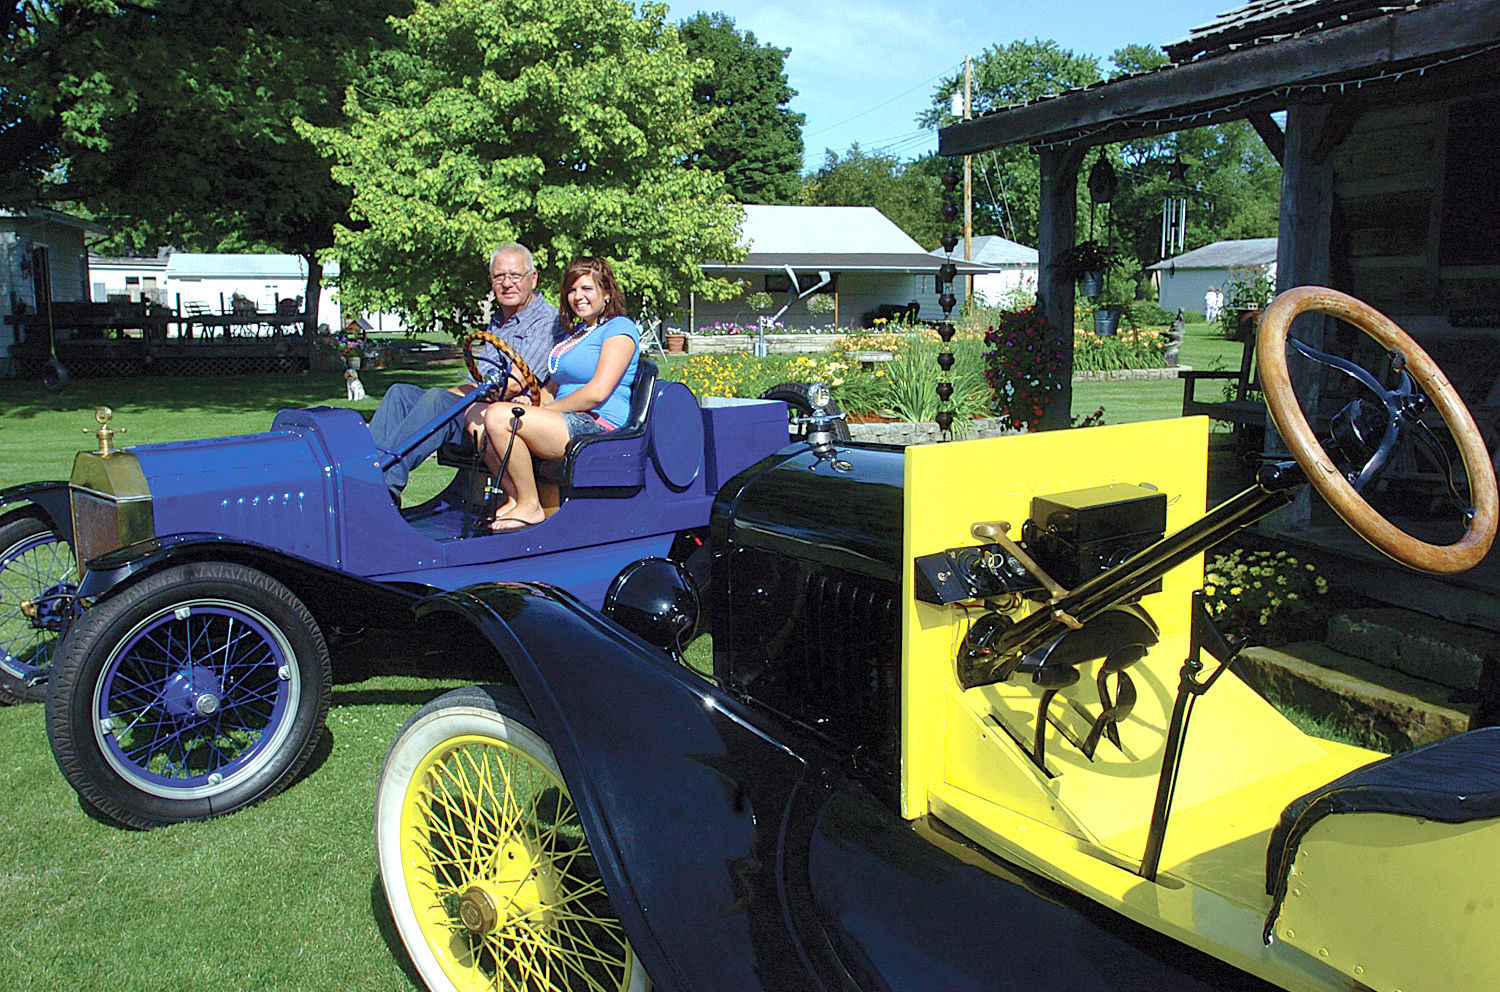 Area man keeps Model T memory alive Local News commercial-news